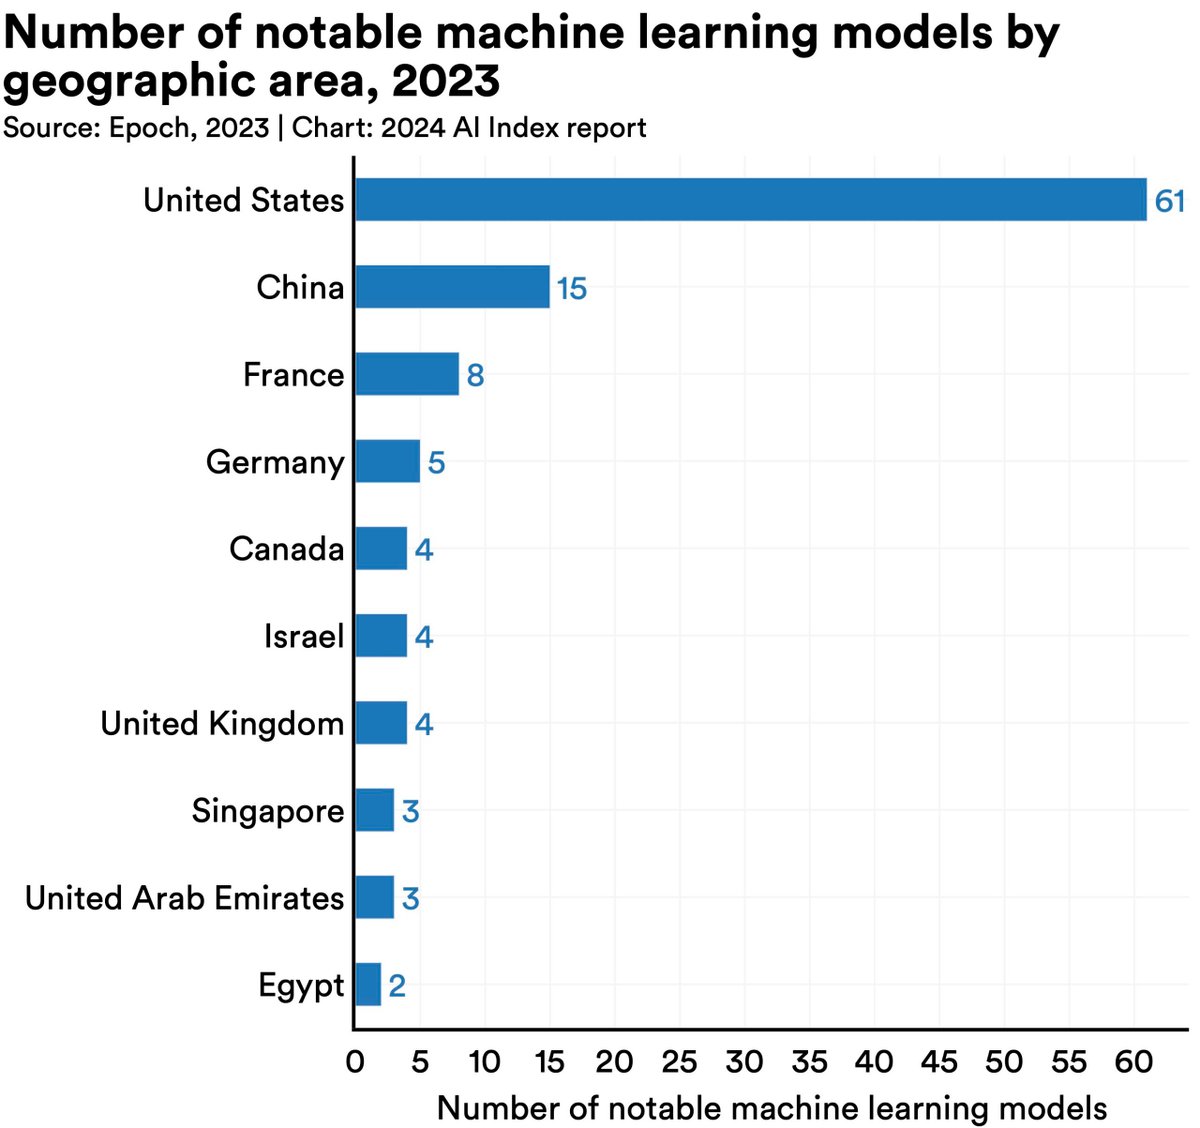 US dominates AI models (61 in 2023) compared to EU (21) & China (15). Global collaboration is key to fostering innovation.

#AI #FutureofTech #GlobalCollaboration